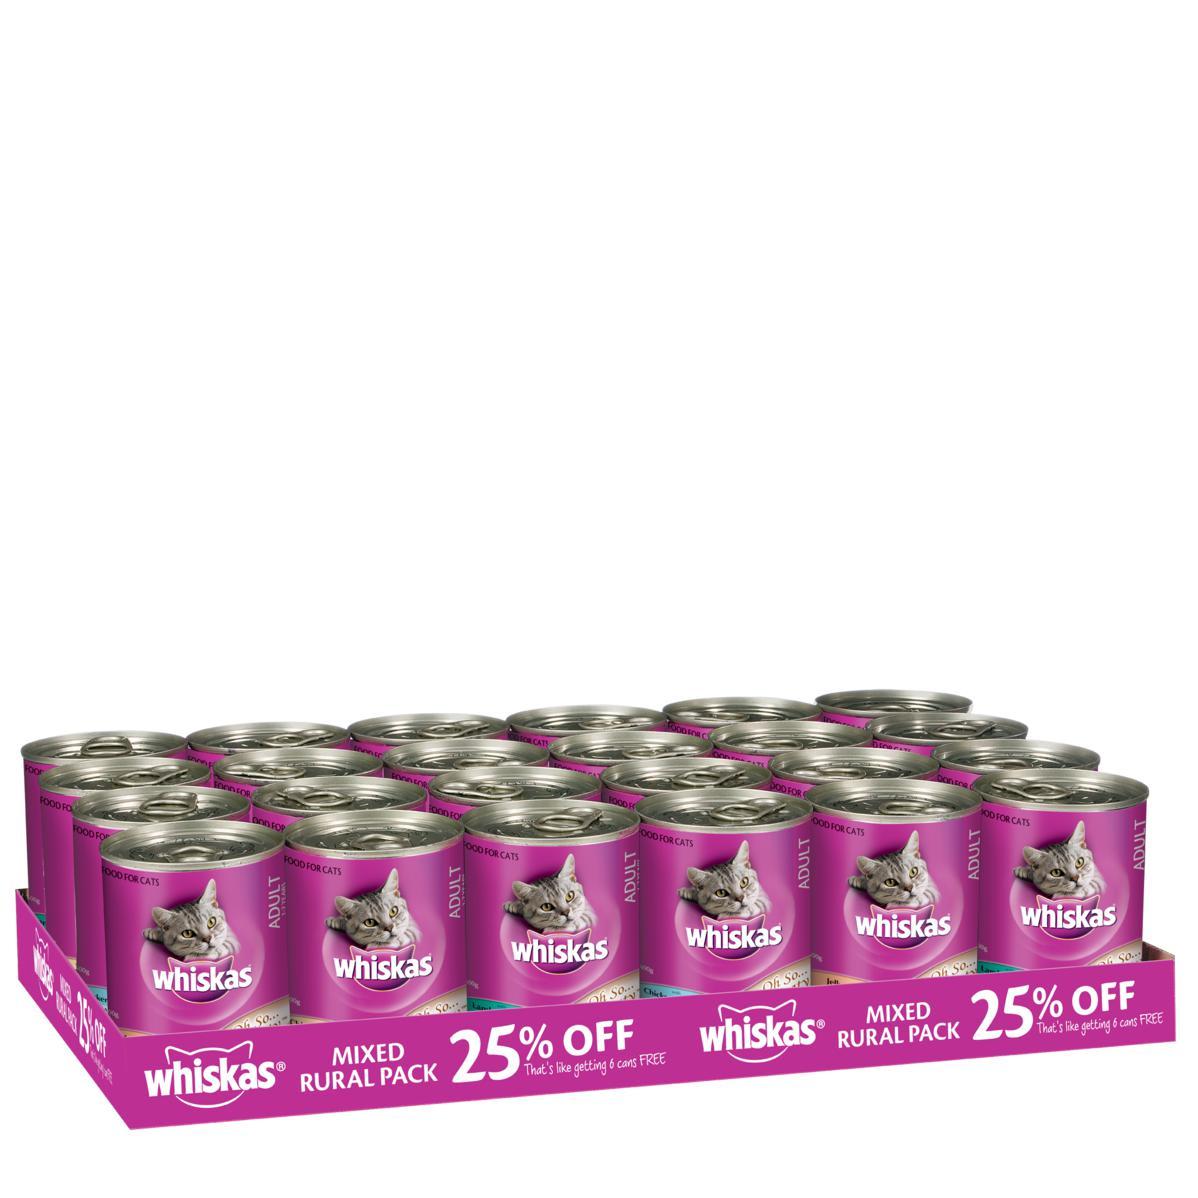 WHISKAS CAT MIX PACK CANS 24x400g-Ranges Country